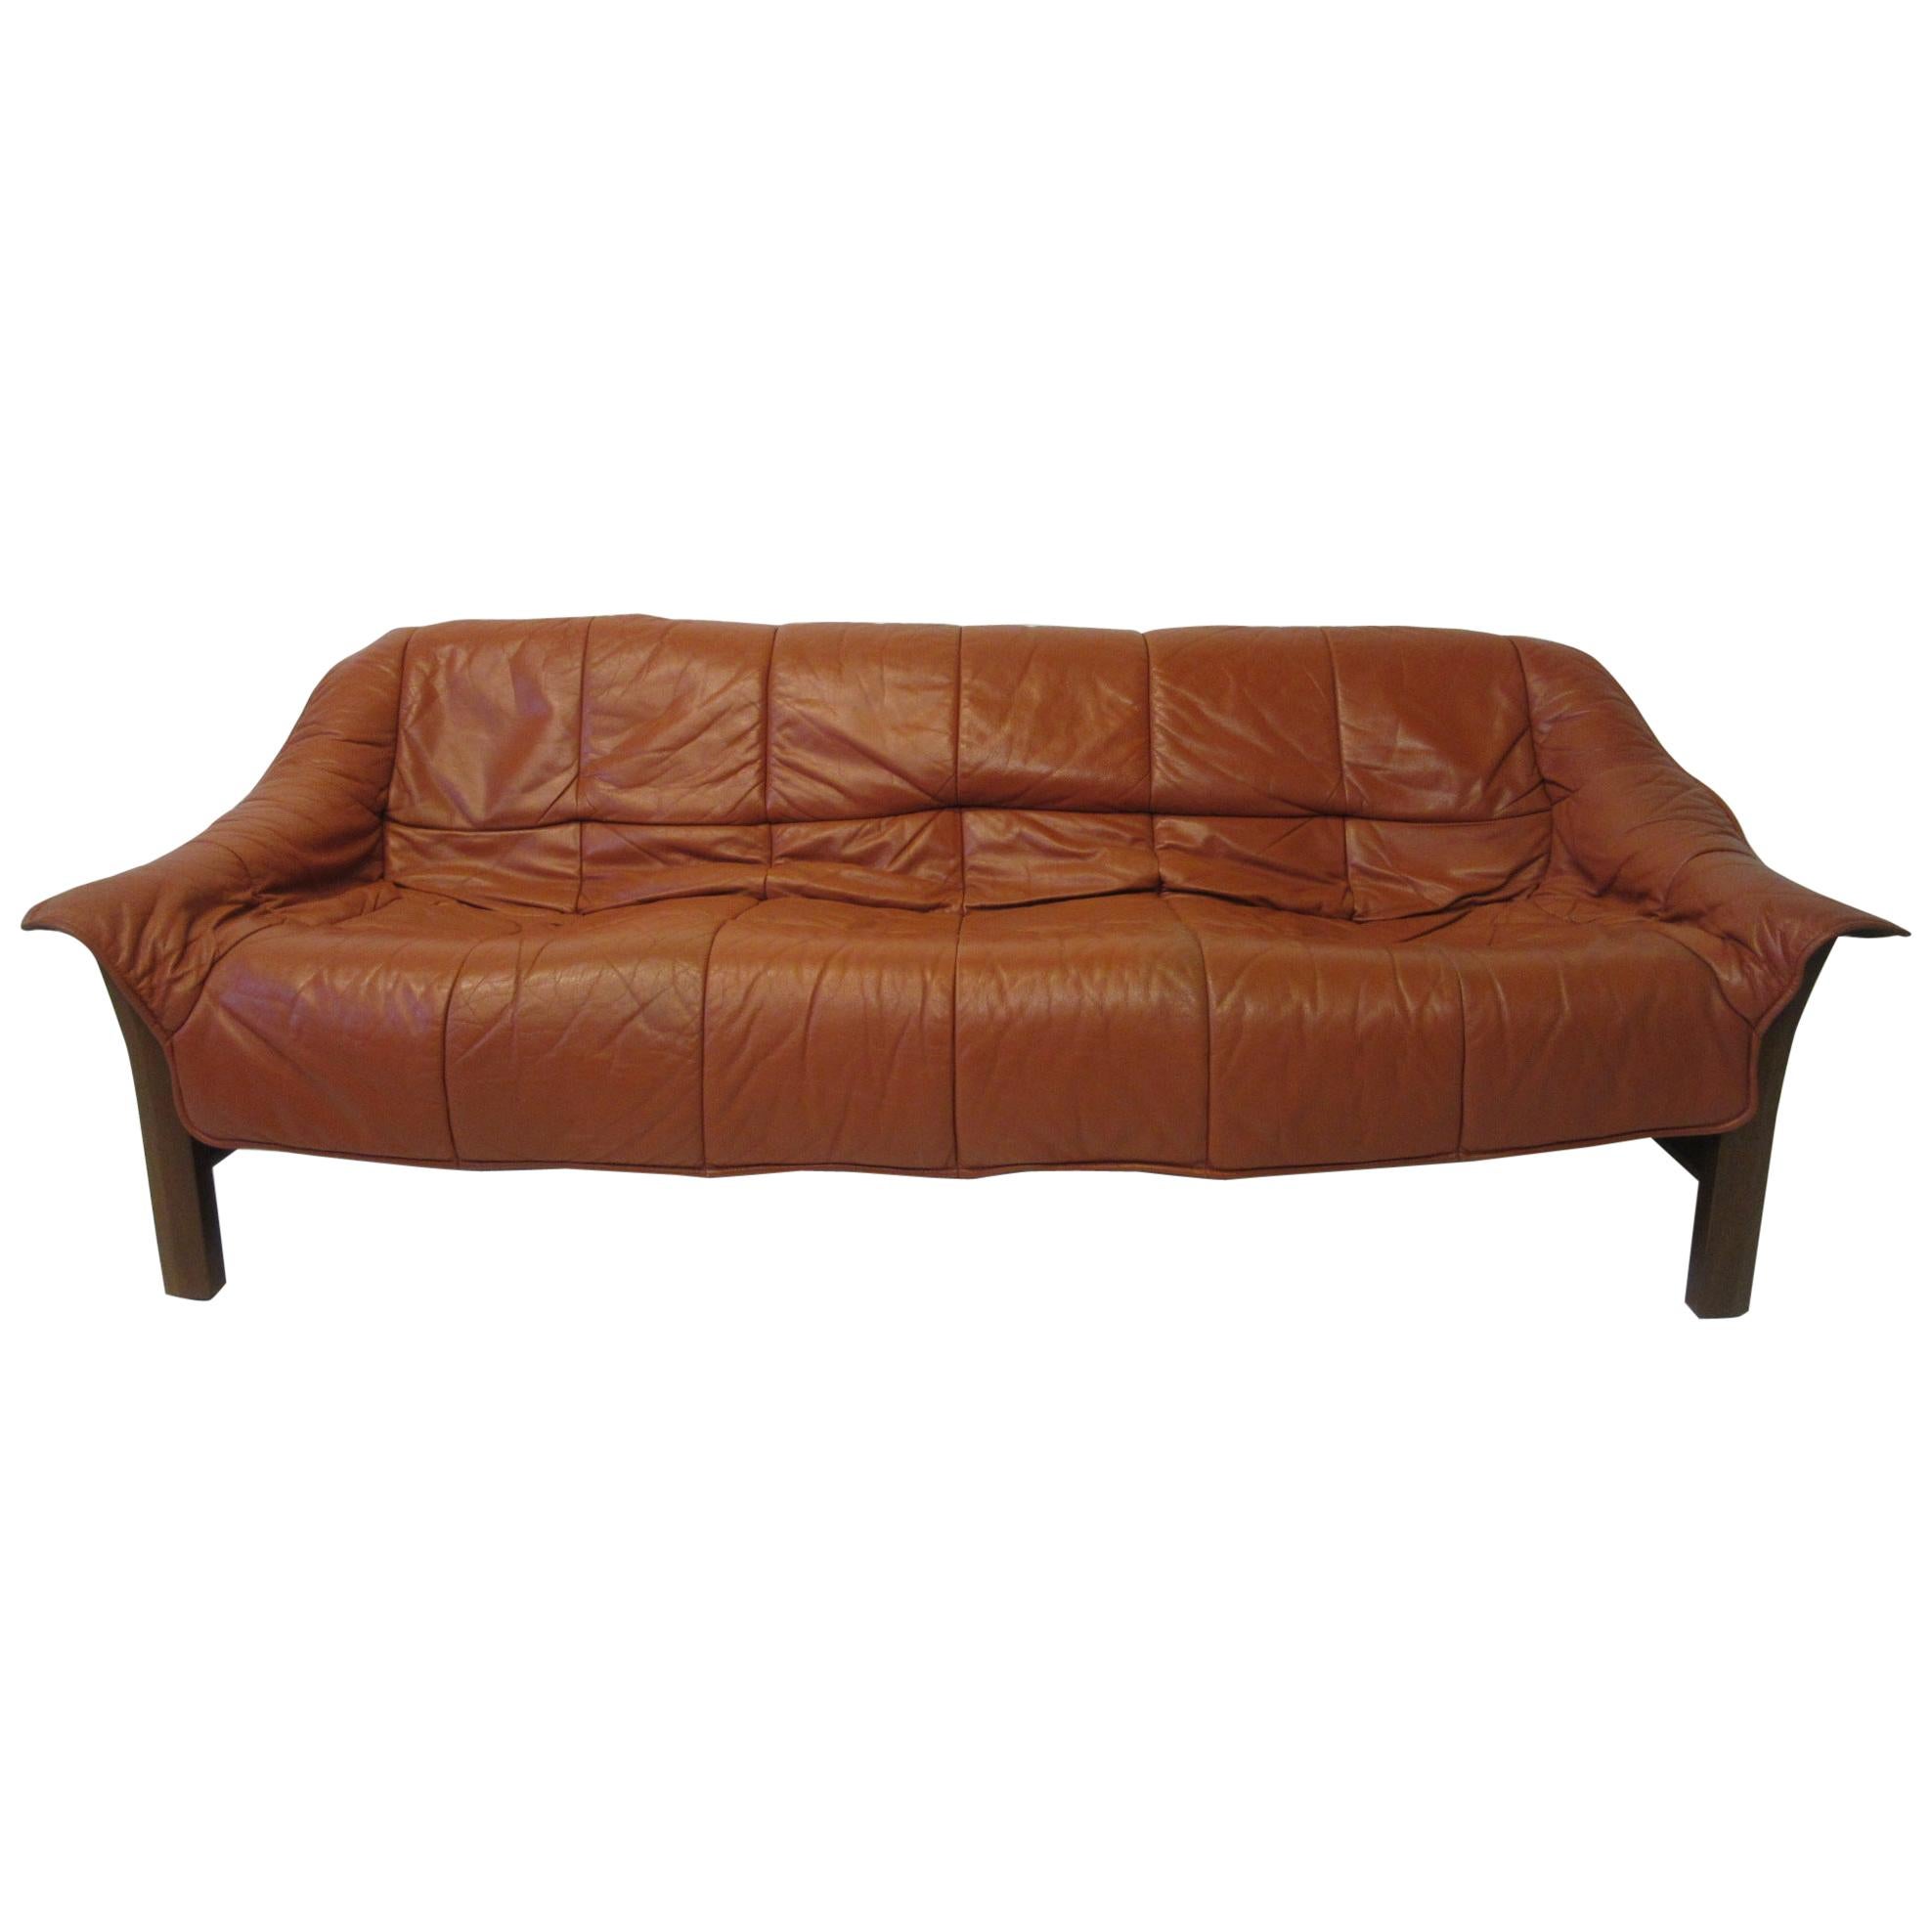 Brazilian Rosewood / Leather Sofa in the style of Percival Lafer